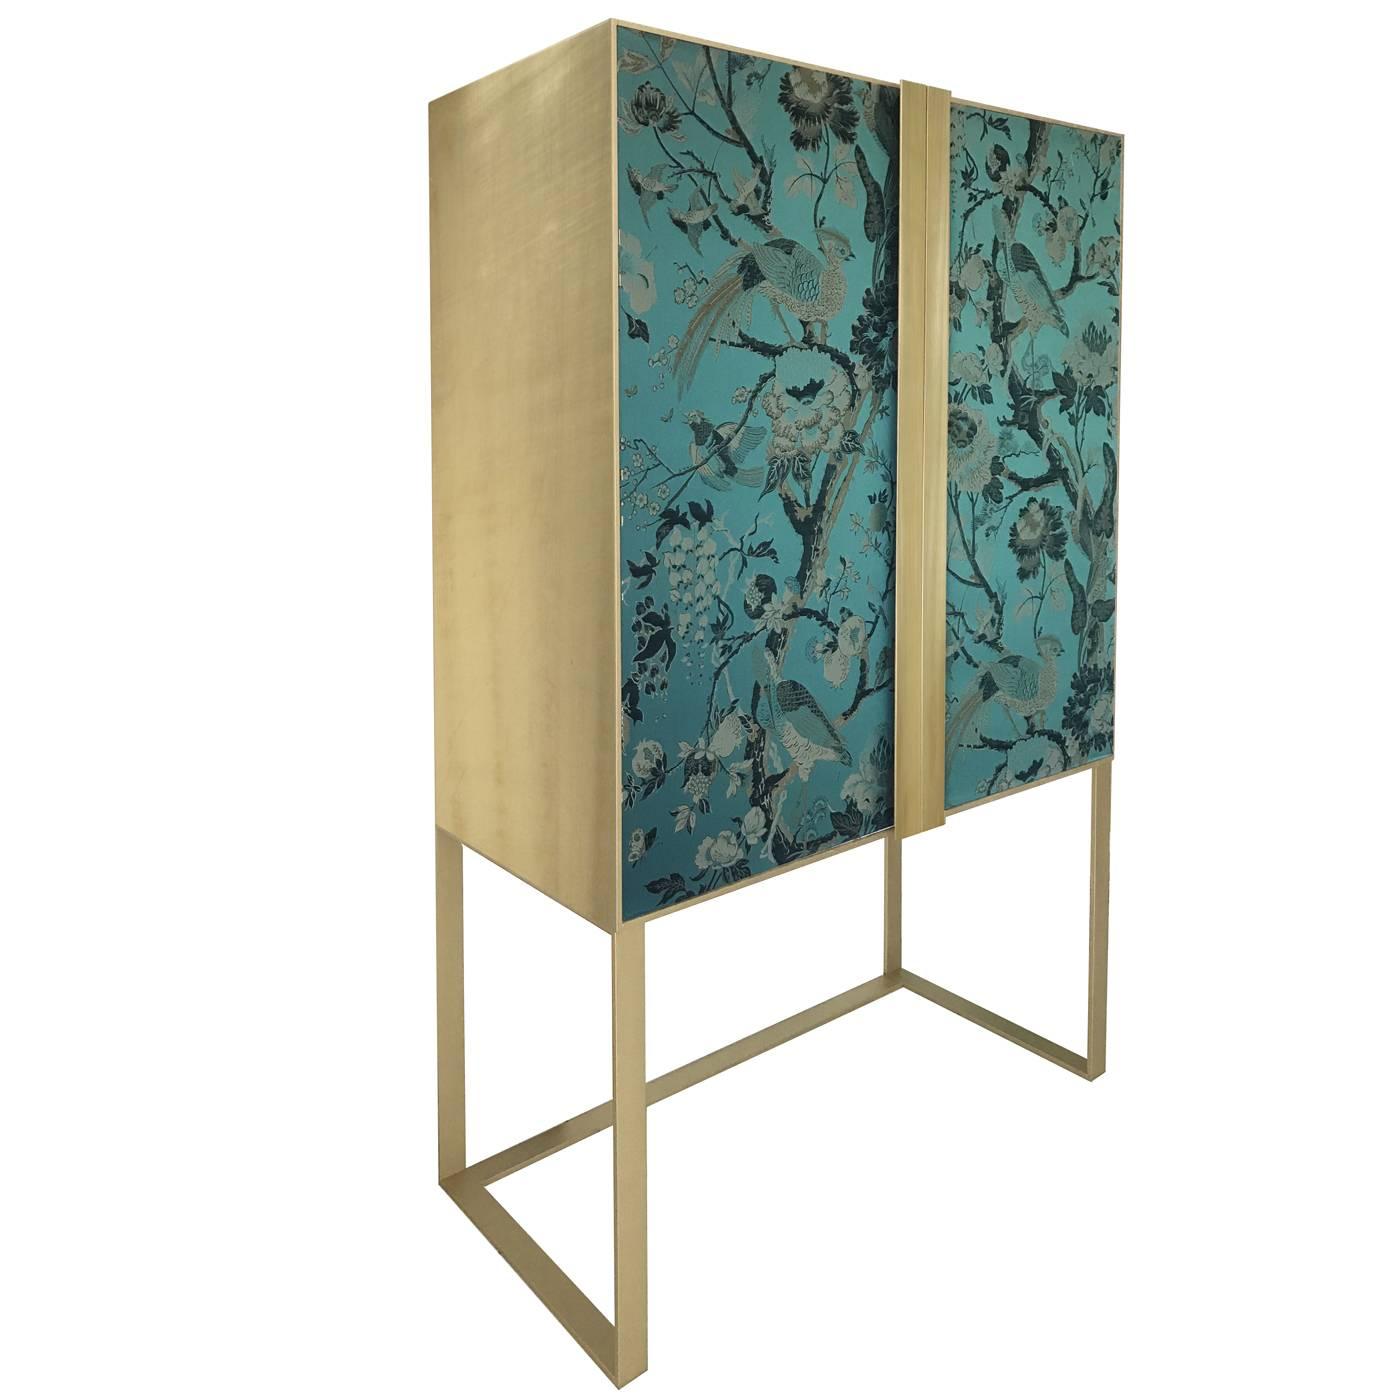 This sophisticated cabinet will complement any decor, thanks to its Minimalist Silhouette and the noble materials used. Its timeless allure is given by the brushed brass structure and handles that elegantly frame the cabinet doors in wood entirely